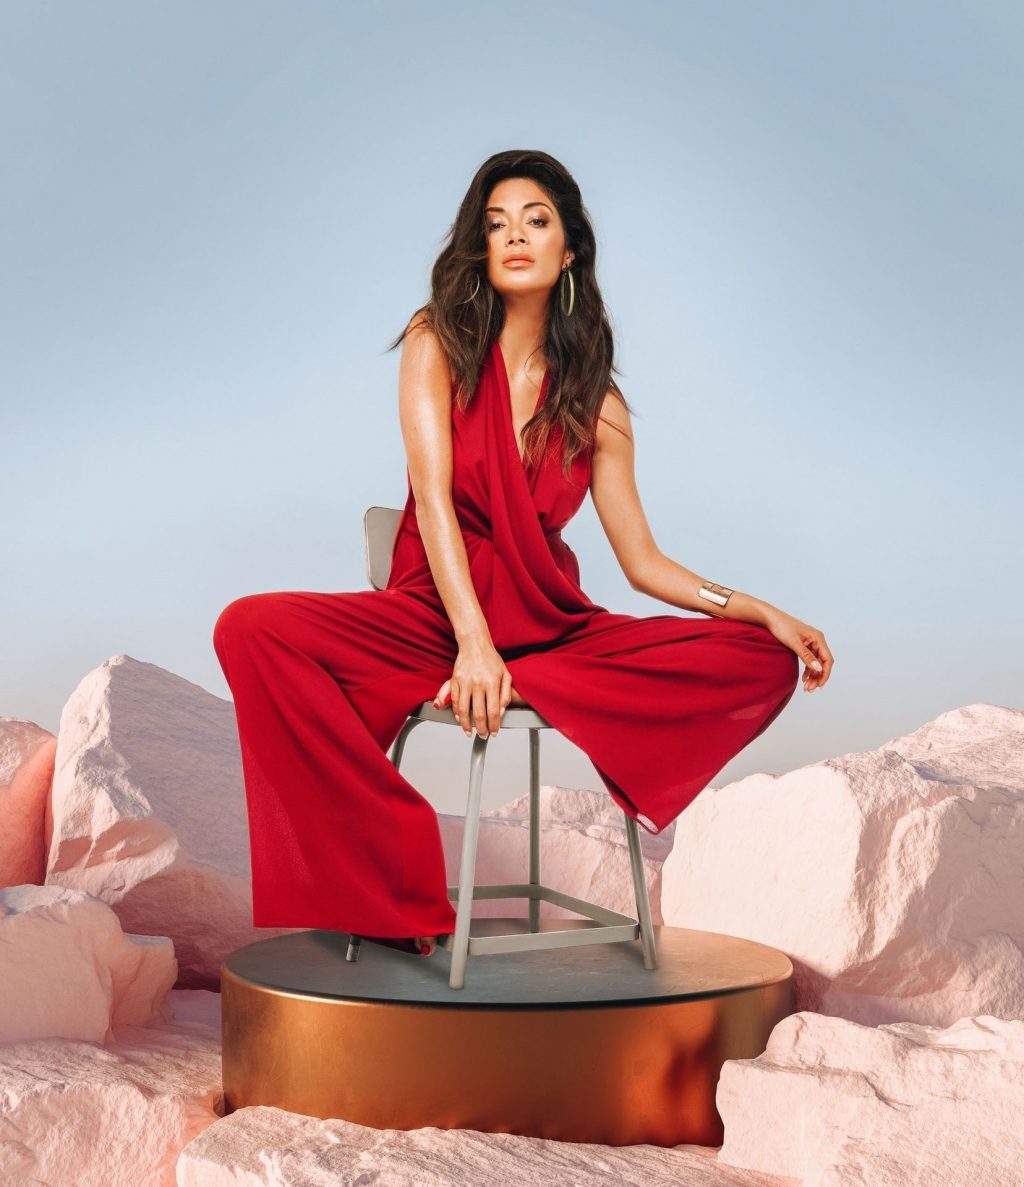 Nicole Scherzinger Oozes Class and Sophistication on a 3d Rendering of Podium Copper and Stone (6 Photos)